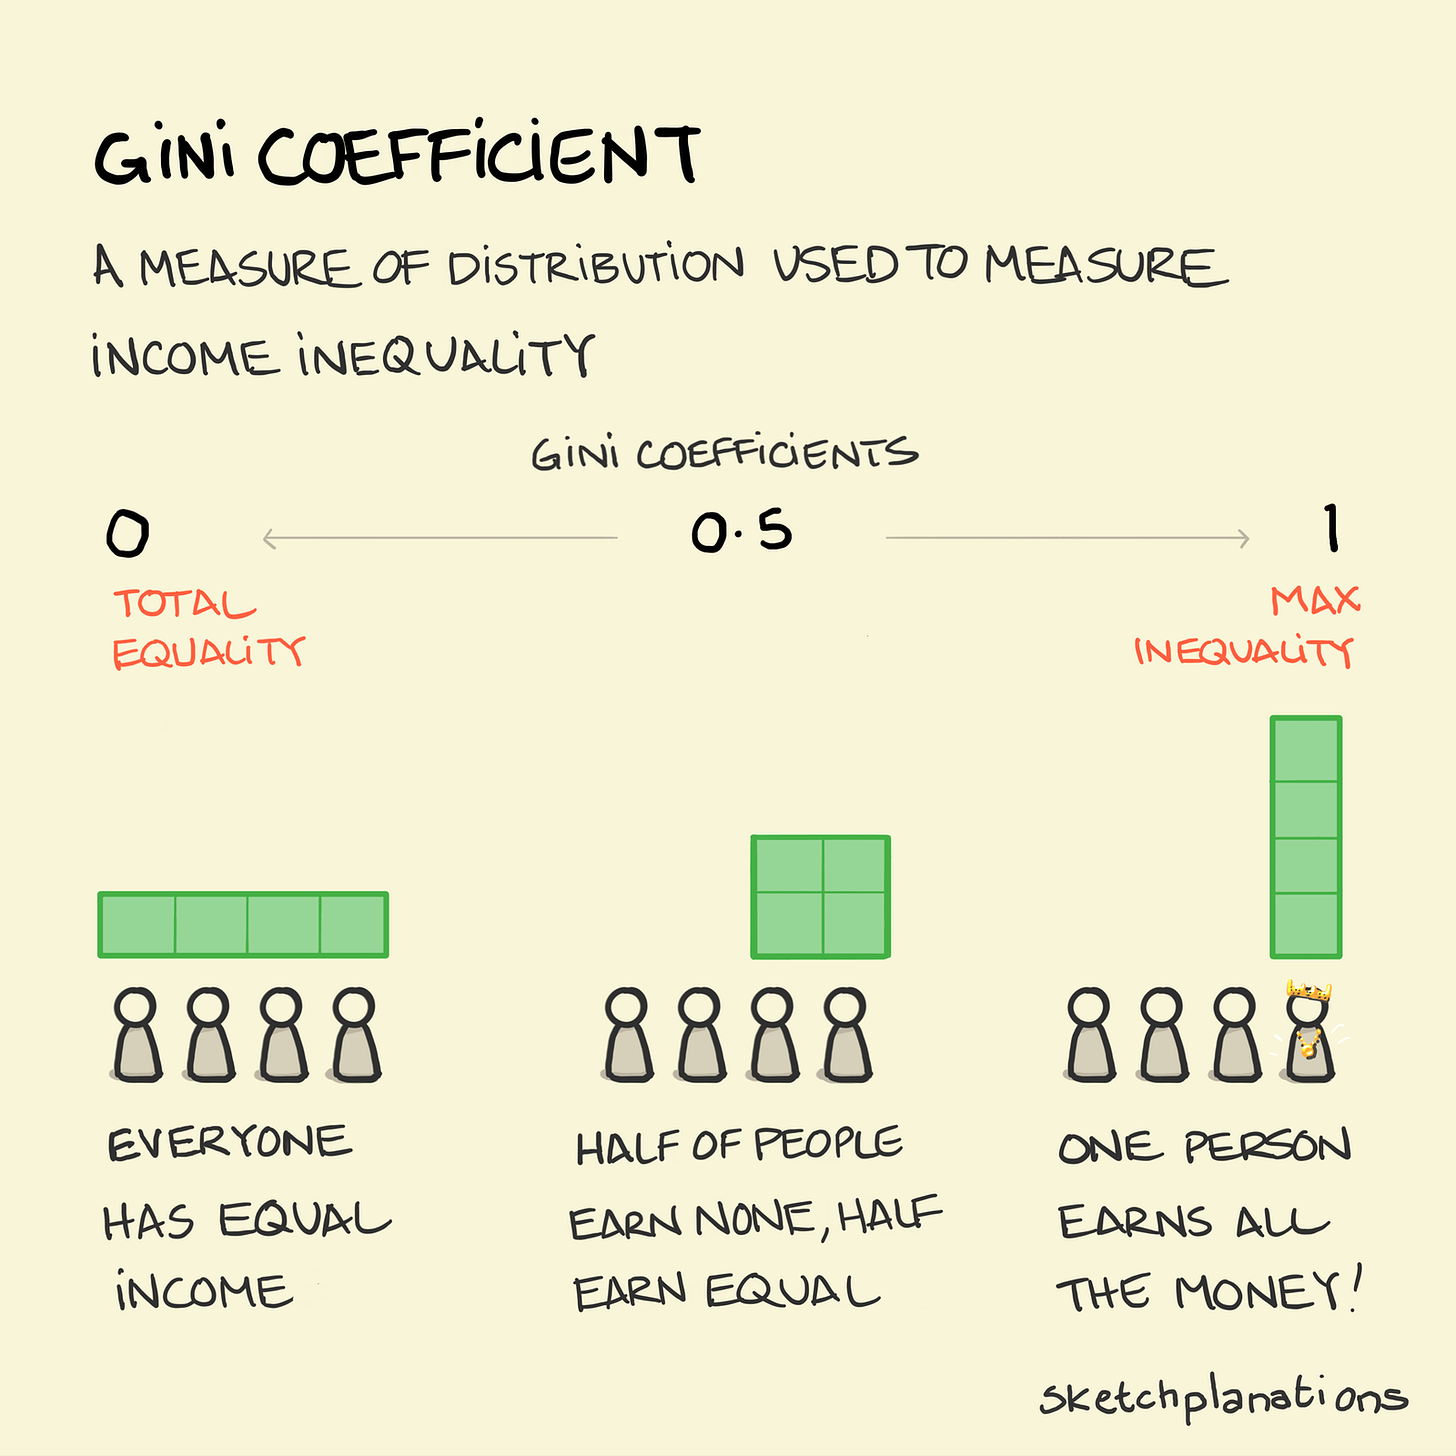 The Gini coefficient - Sketchplanations